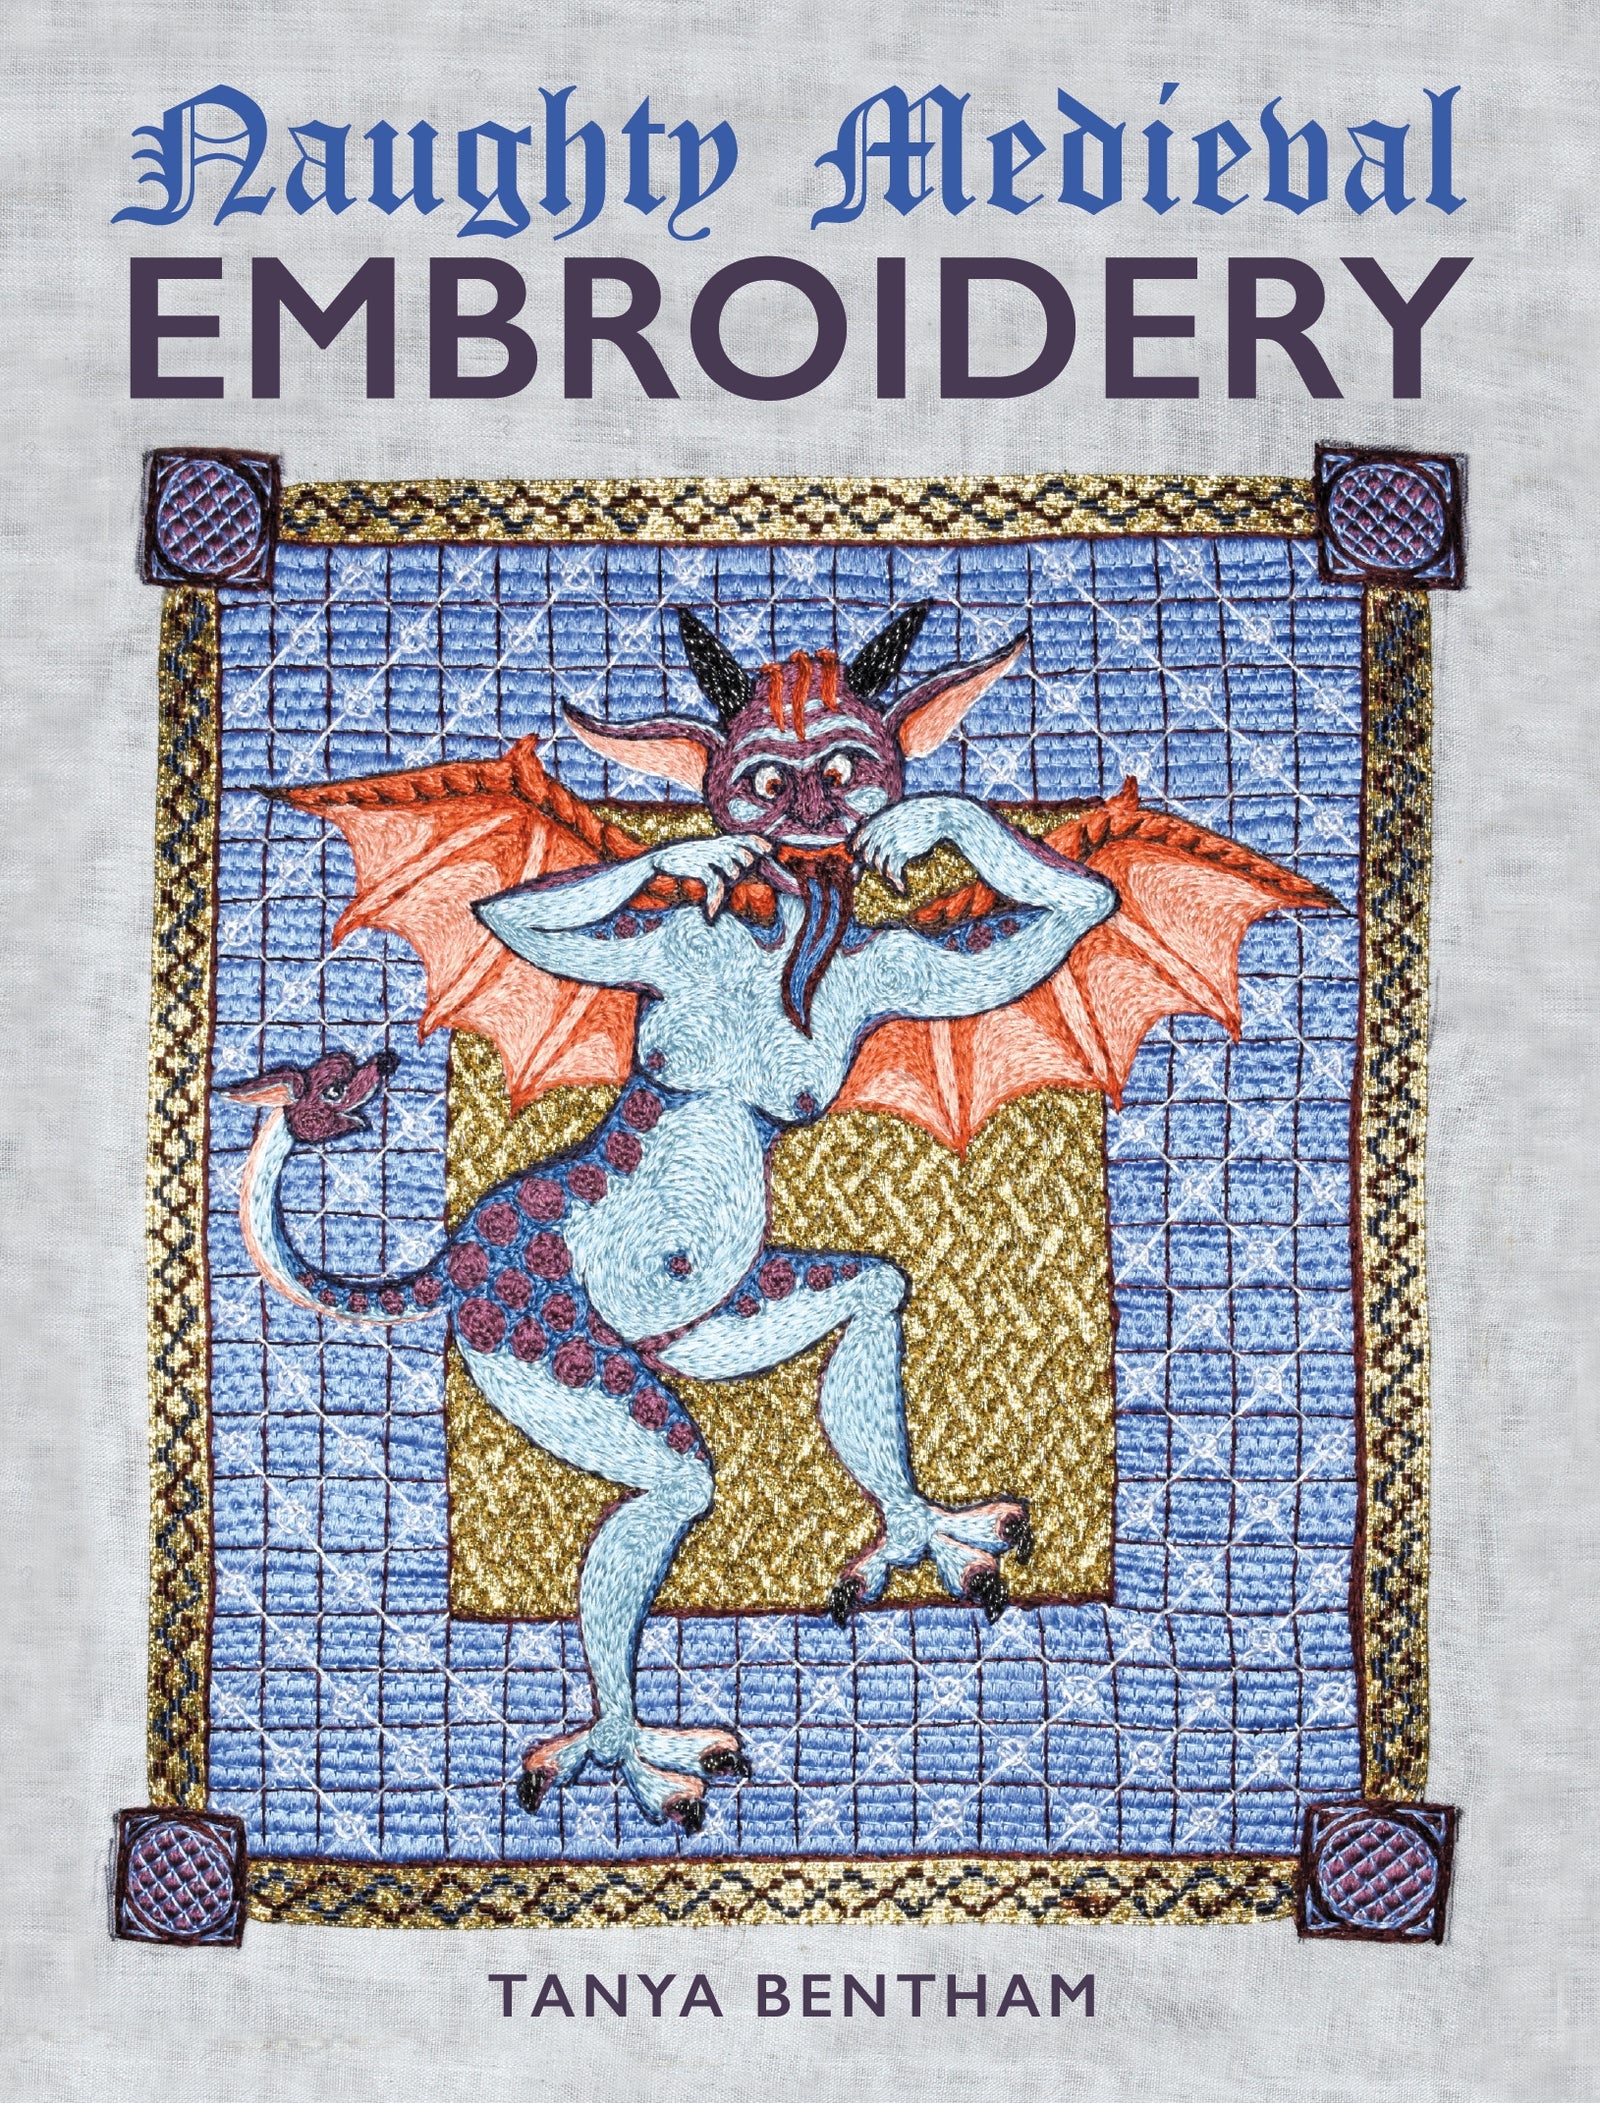 The Crowood Press - 'Hand embroidery is a great way to relax and